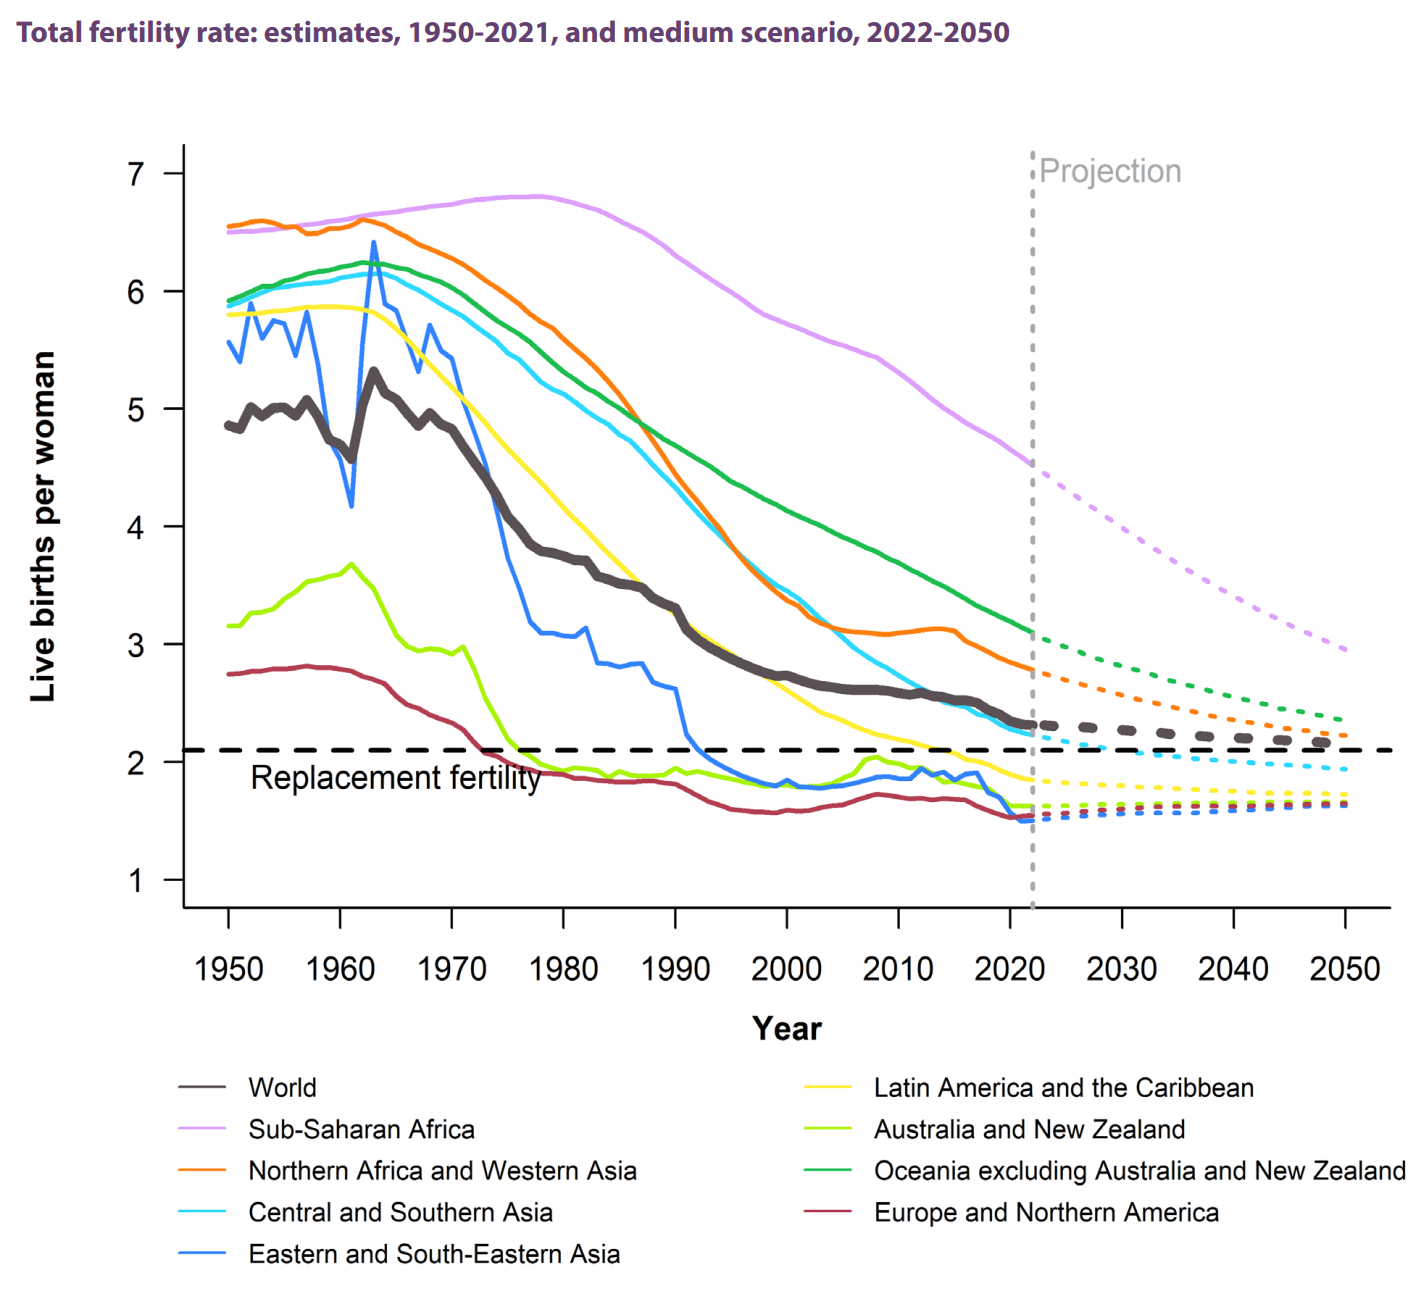 Total human fertility rate estimates, 1950-2021, and medium scenario, 2022-2050. Despite the continuing decline in the average number of births per woman, the total annual number of births has remained stable at around 140 million since the late 1980s due to the youthful age distribution of the global population. The number of births has approached 140 million per year in the late 1980s, when the large cohorts of the earlier “baby boom” of the 1950s and 1960s were having their children. In 2021, 134 million babies were born worldwide. In the future, the number of newborns is expected to slightly increase to reach 138 million annually between 2040 and 2045, despite the continuous decline in the average number of births per woman. Because uncertainty around the number of births is cumulative - i.e., each birth cohort will potentially become the parents of future generations - the plausible or likely range for future numbers of births is relatively wide: with a probability of 95 percent, the size of the global birth cohort in 2050 will lie between 118 and 155 million. In 2021, most births worldwide occurred in the two most populous regions - Central and Southern Asia (28 percent of global births) and Eastern and South-Eastern Asia (18 percent) - and in sub-Saharan Africa (29 percent), the region with the highest fertility level. There is a wide variation in fertility levels across regions and countries. In addition to sub-Saharan Africa (4.6 births per woman), fertility remained above the world’s average in 2021 in Oceania excluding Australia and New Zealand (3.1), Northern Africa and Western Asia (2.8), and Central and Southern Asia (2.3). Graphic: UN DESA